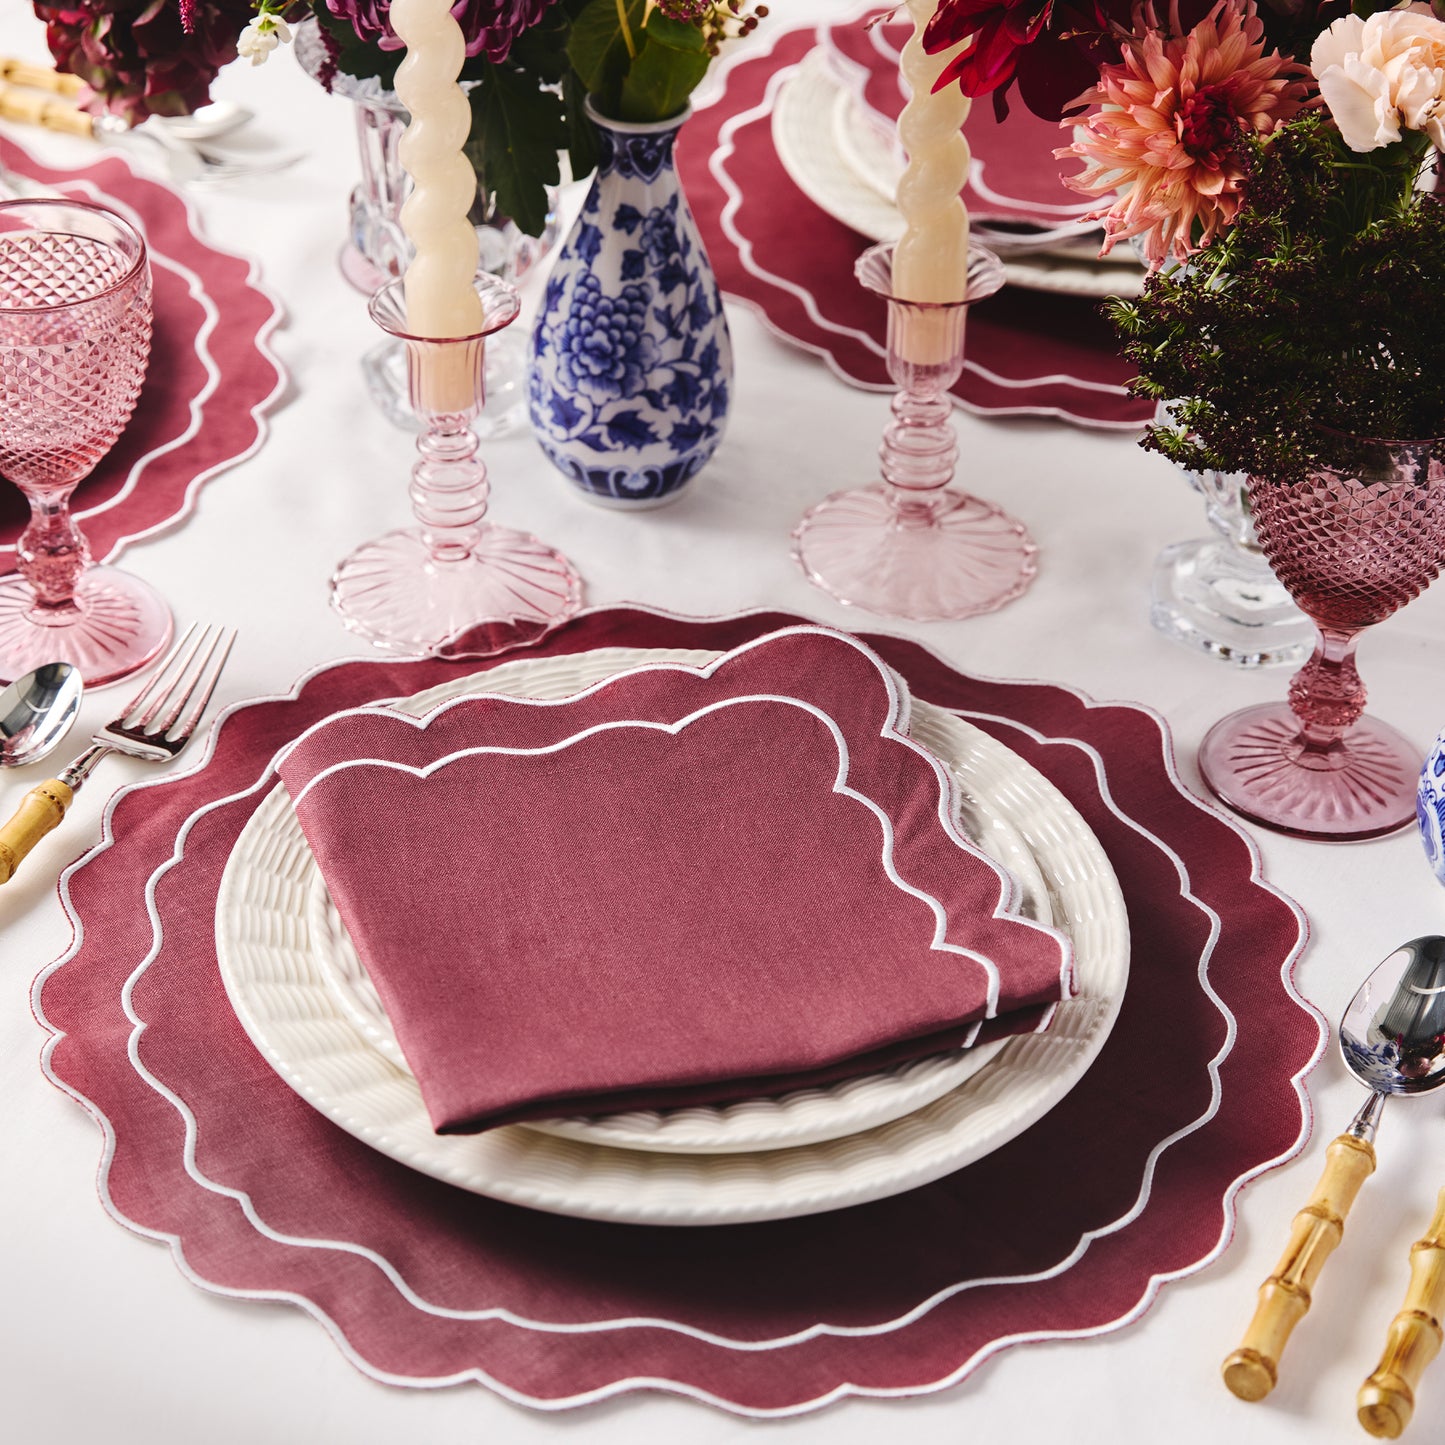 Set of 4 - Pure Linen Scalloped Edged Placemat - Cherry Red